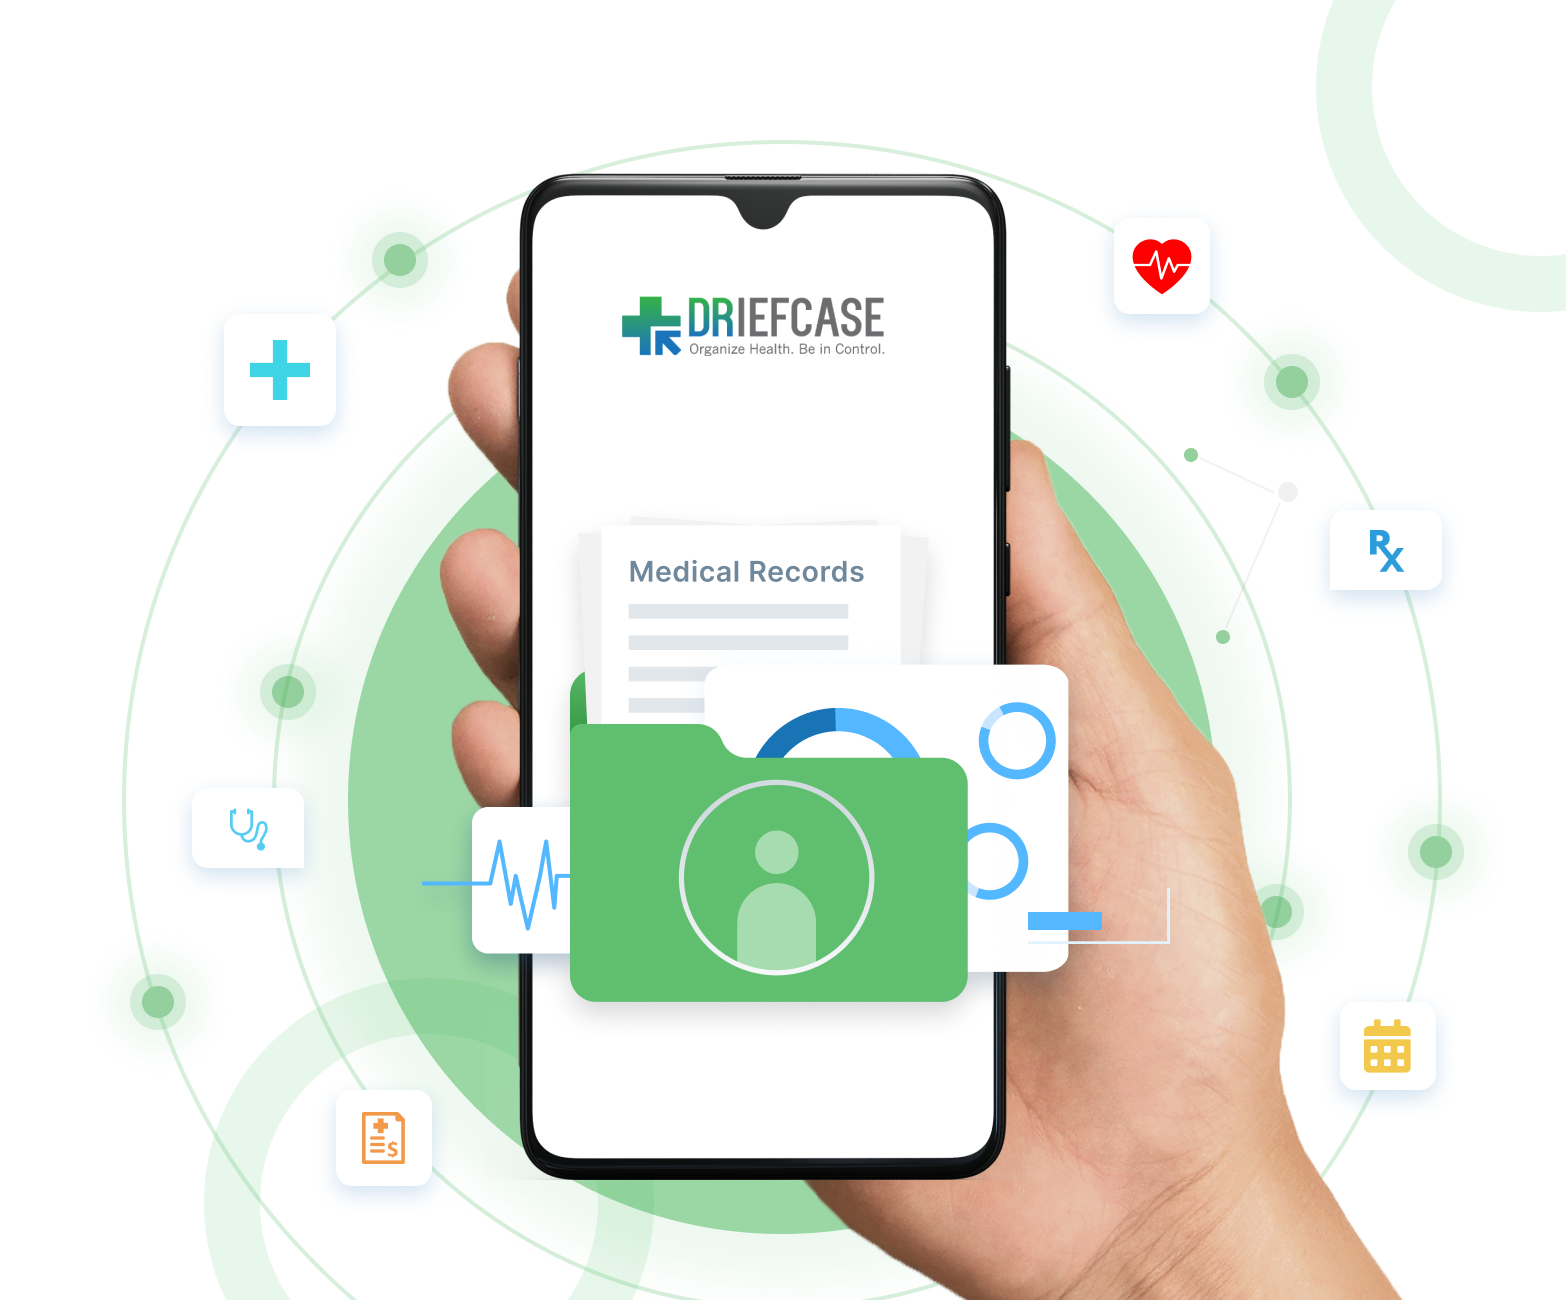 NHA approved DRiefcase to store personal healthcare records through Whatsapp